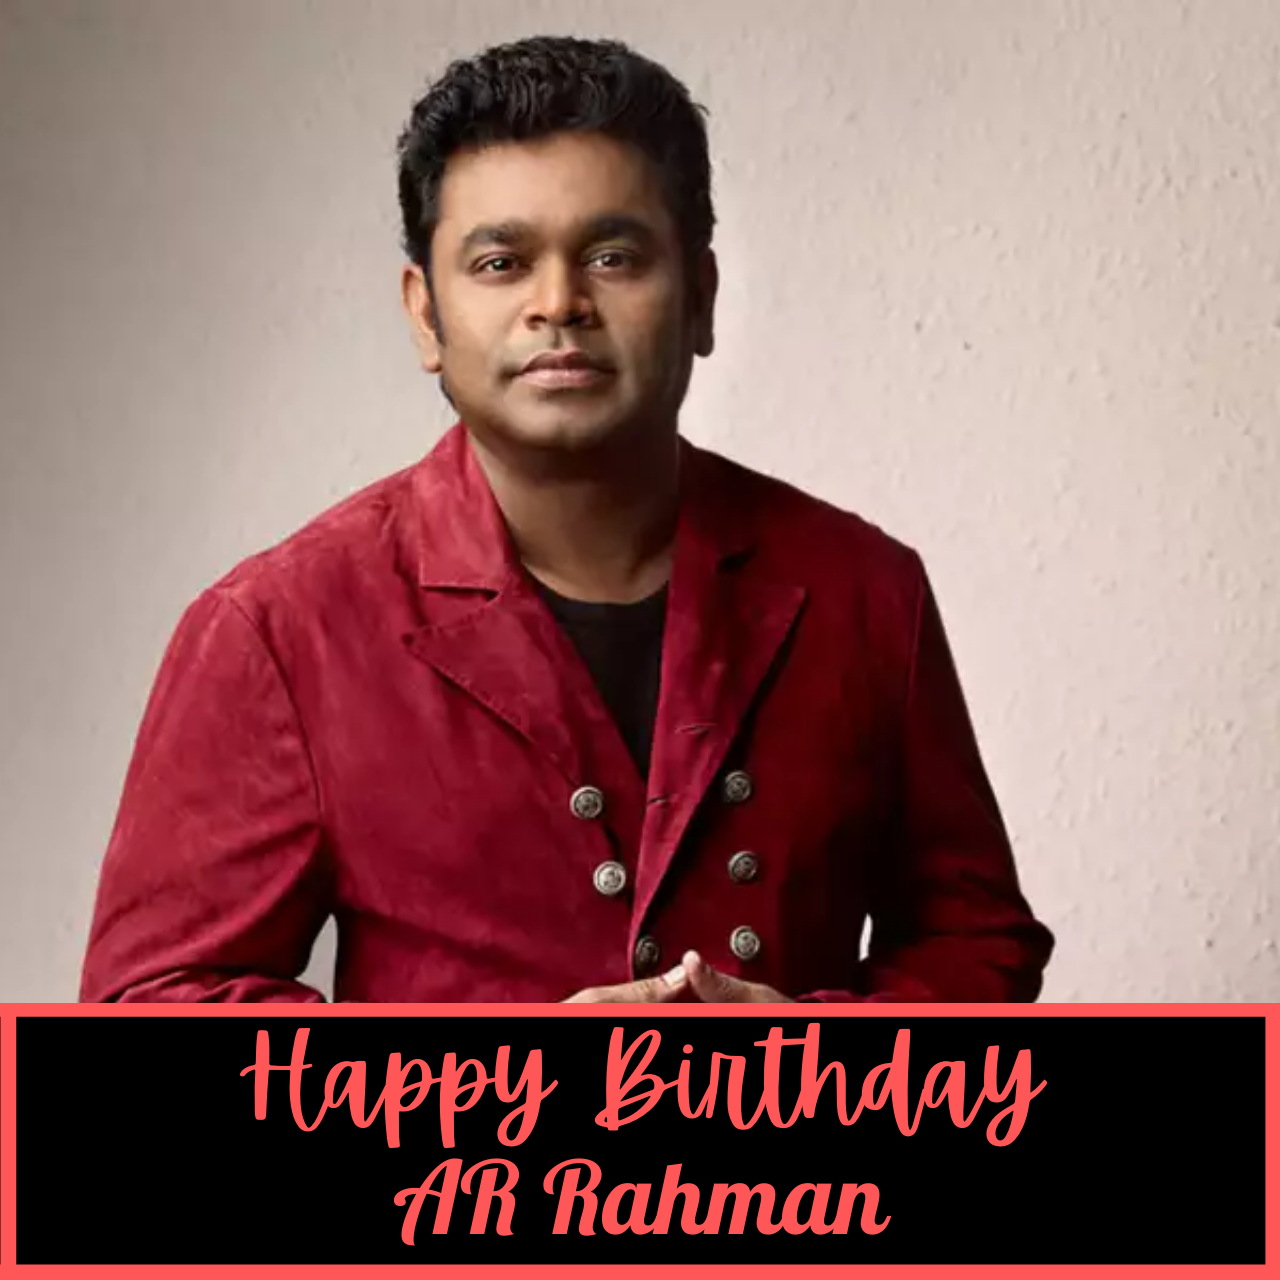 Happy Birthday AR Rahman Wishes, Quotes, HD Images, Messages, Greetings, and WhatsApp Status Video to greet "The Mozart of Madras"